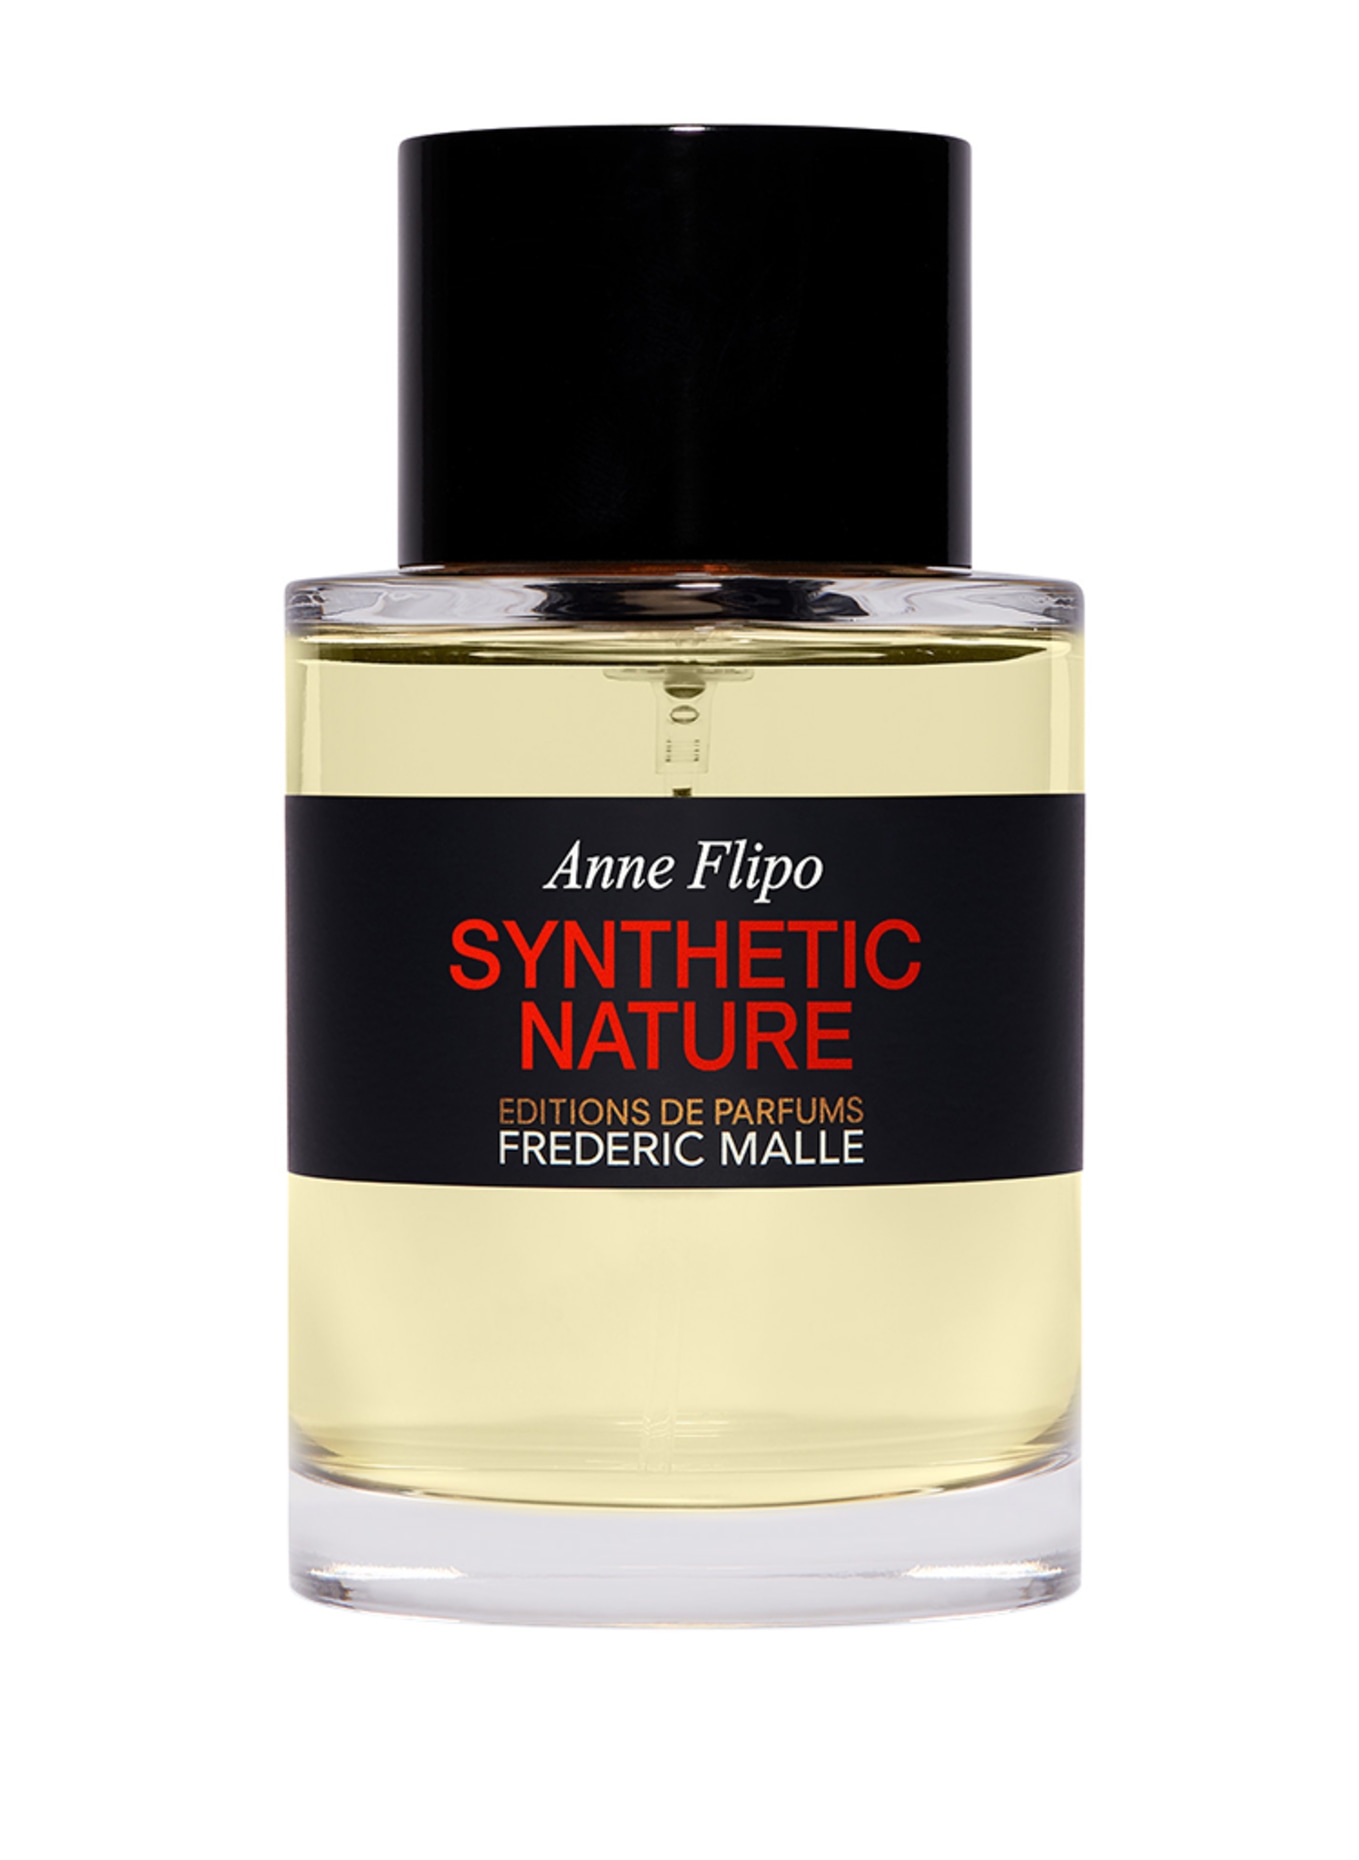 EDITIONS DE PARFUMS FREDERIC MALLE SYNTHETIC NATURE COLOGNE (Bild 1)